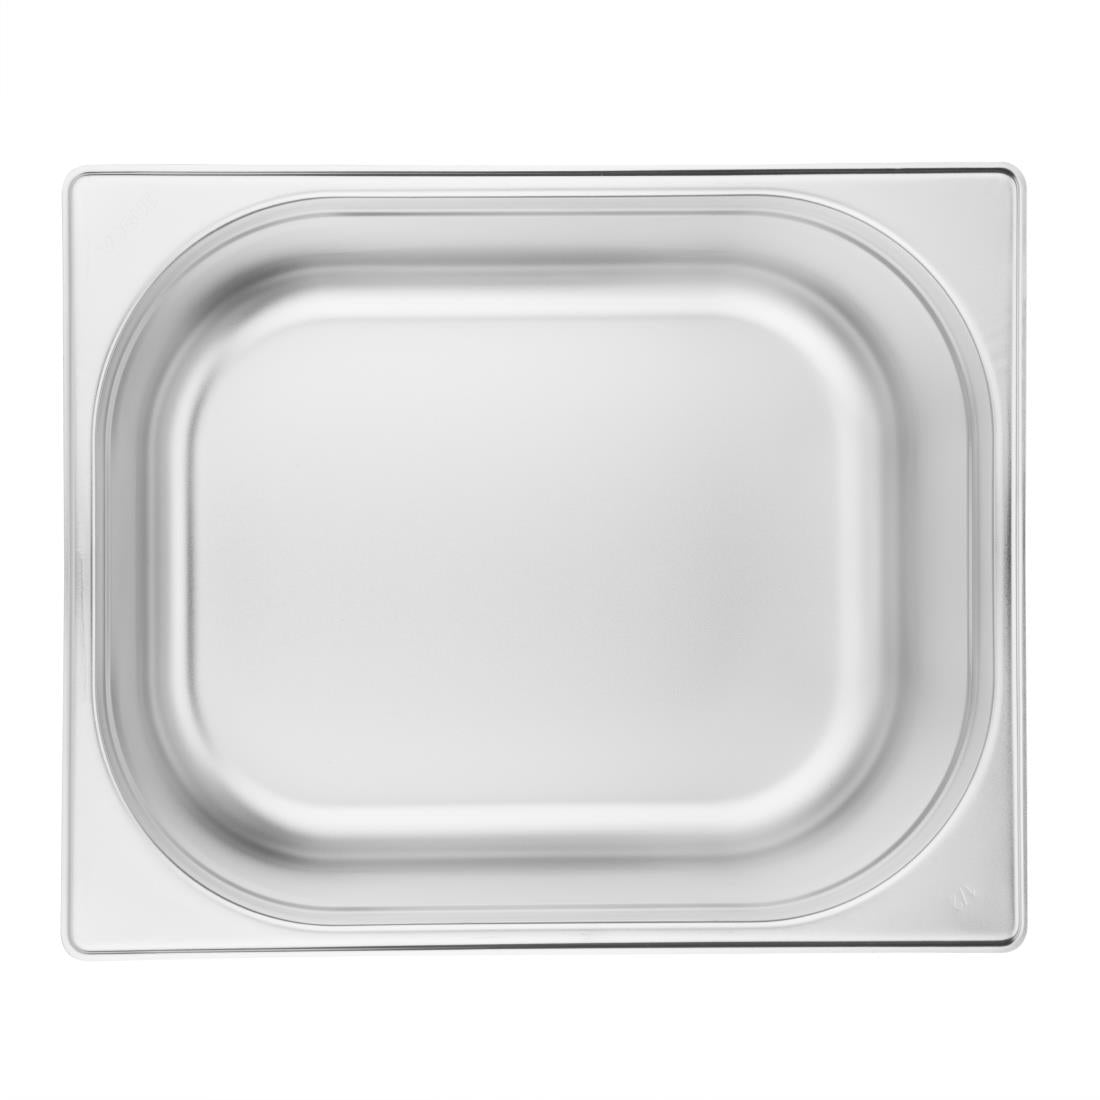 Vogue Stainless Steel 1/2 Gastronorm Pan 150mm